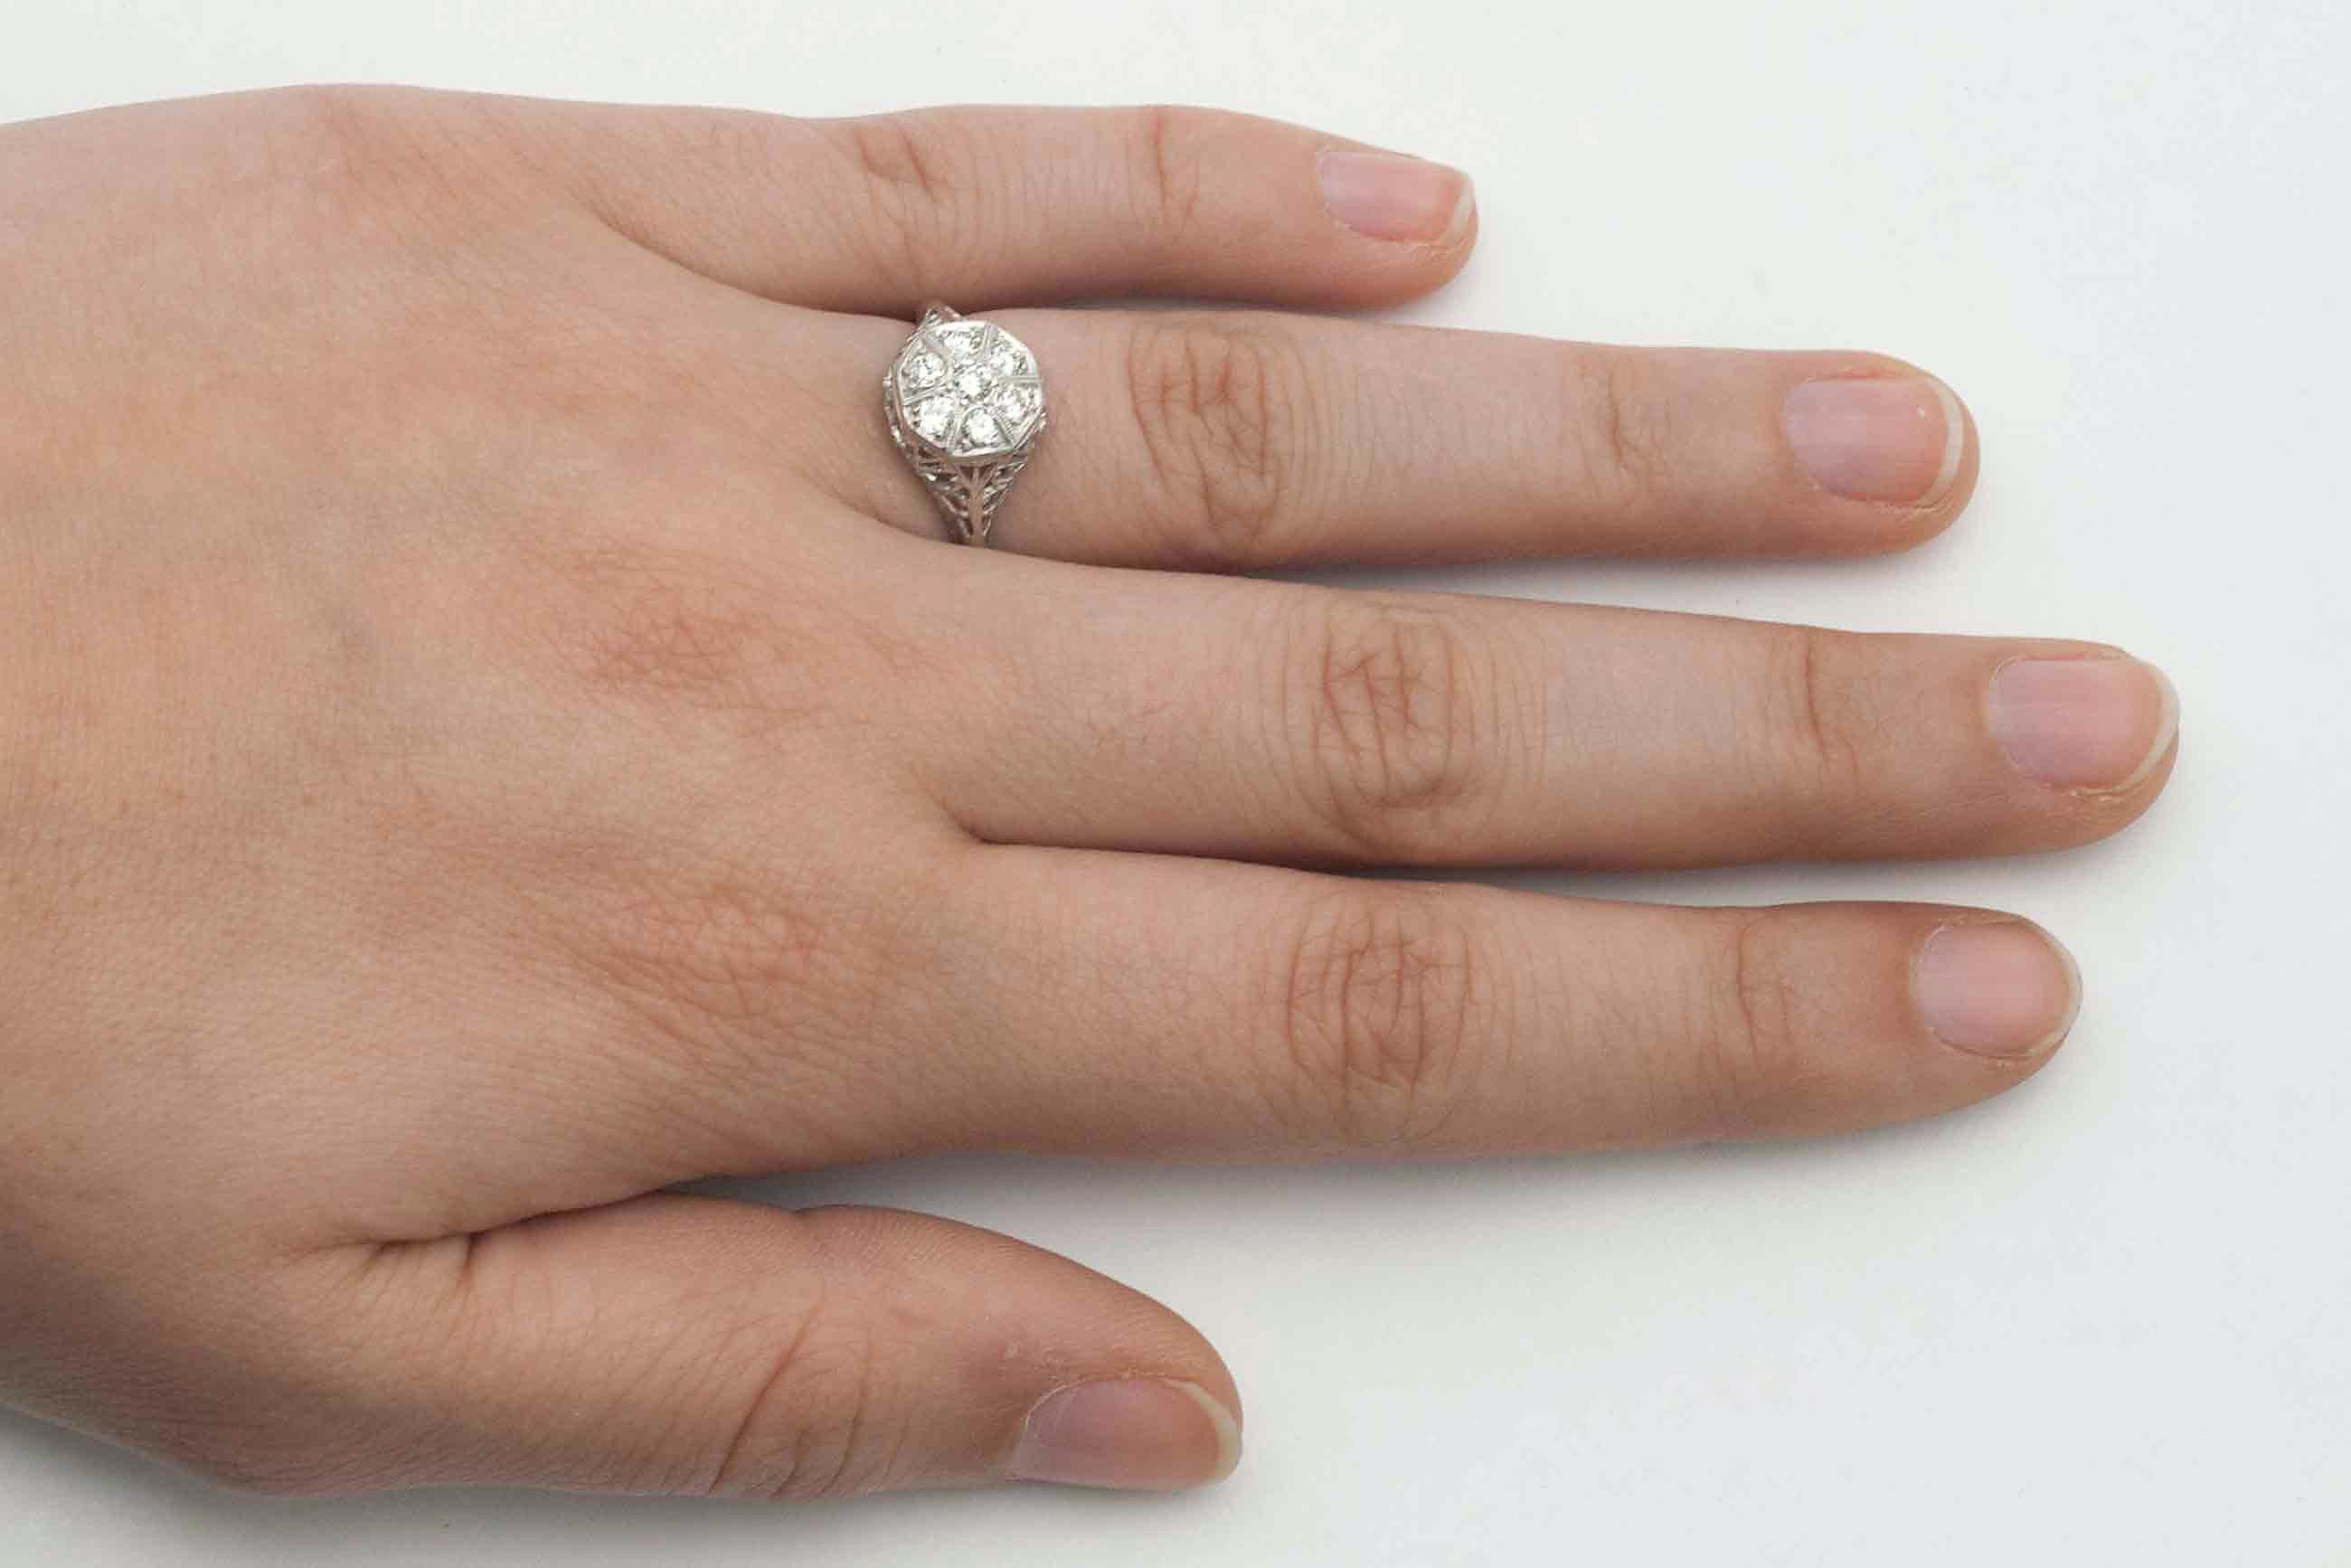 The Minneapolis vintage engagement ring. Seven matched old mine cut diamonds are set in a cluster that give the appearance of a large solitaire. The graceful filigree shoulders taper to a fine, knife edge band for a dainty feel. The work on the